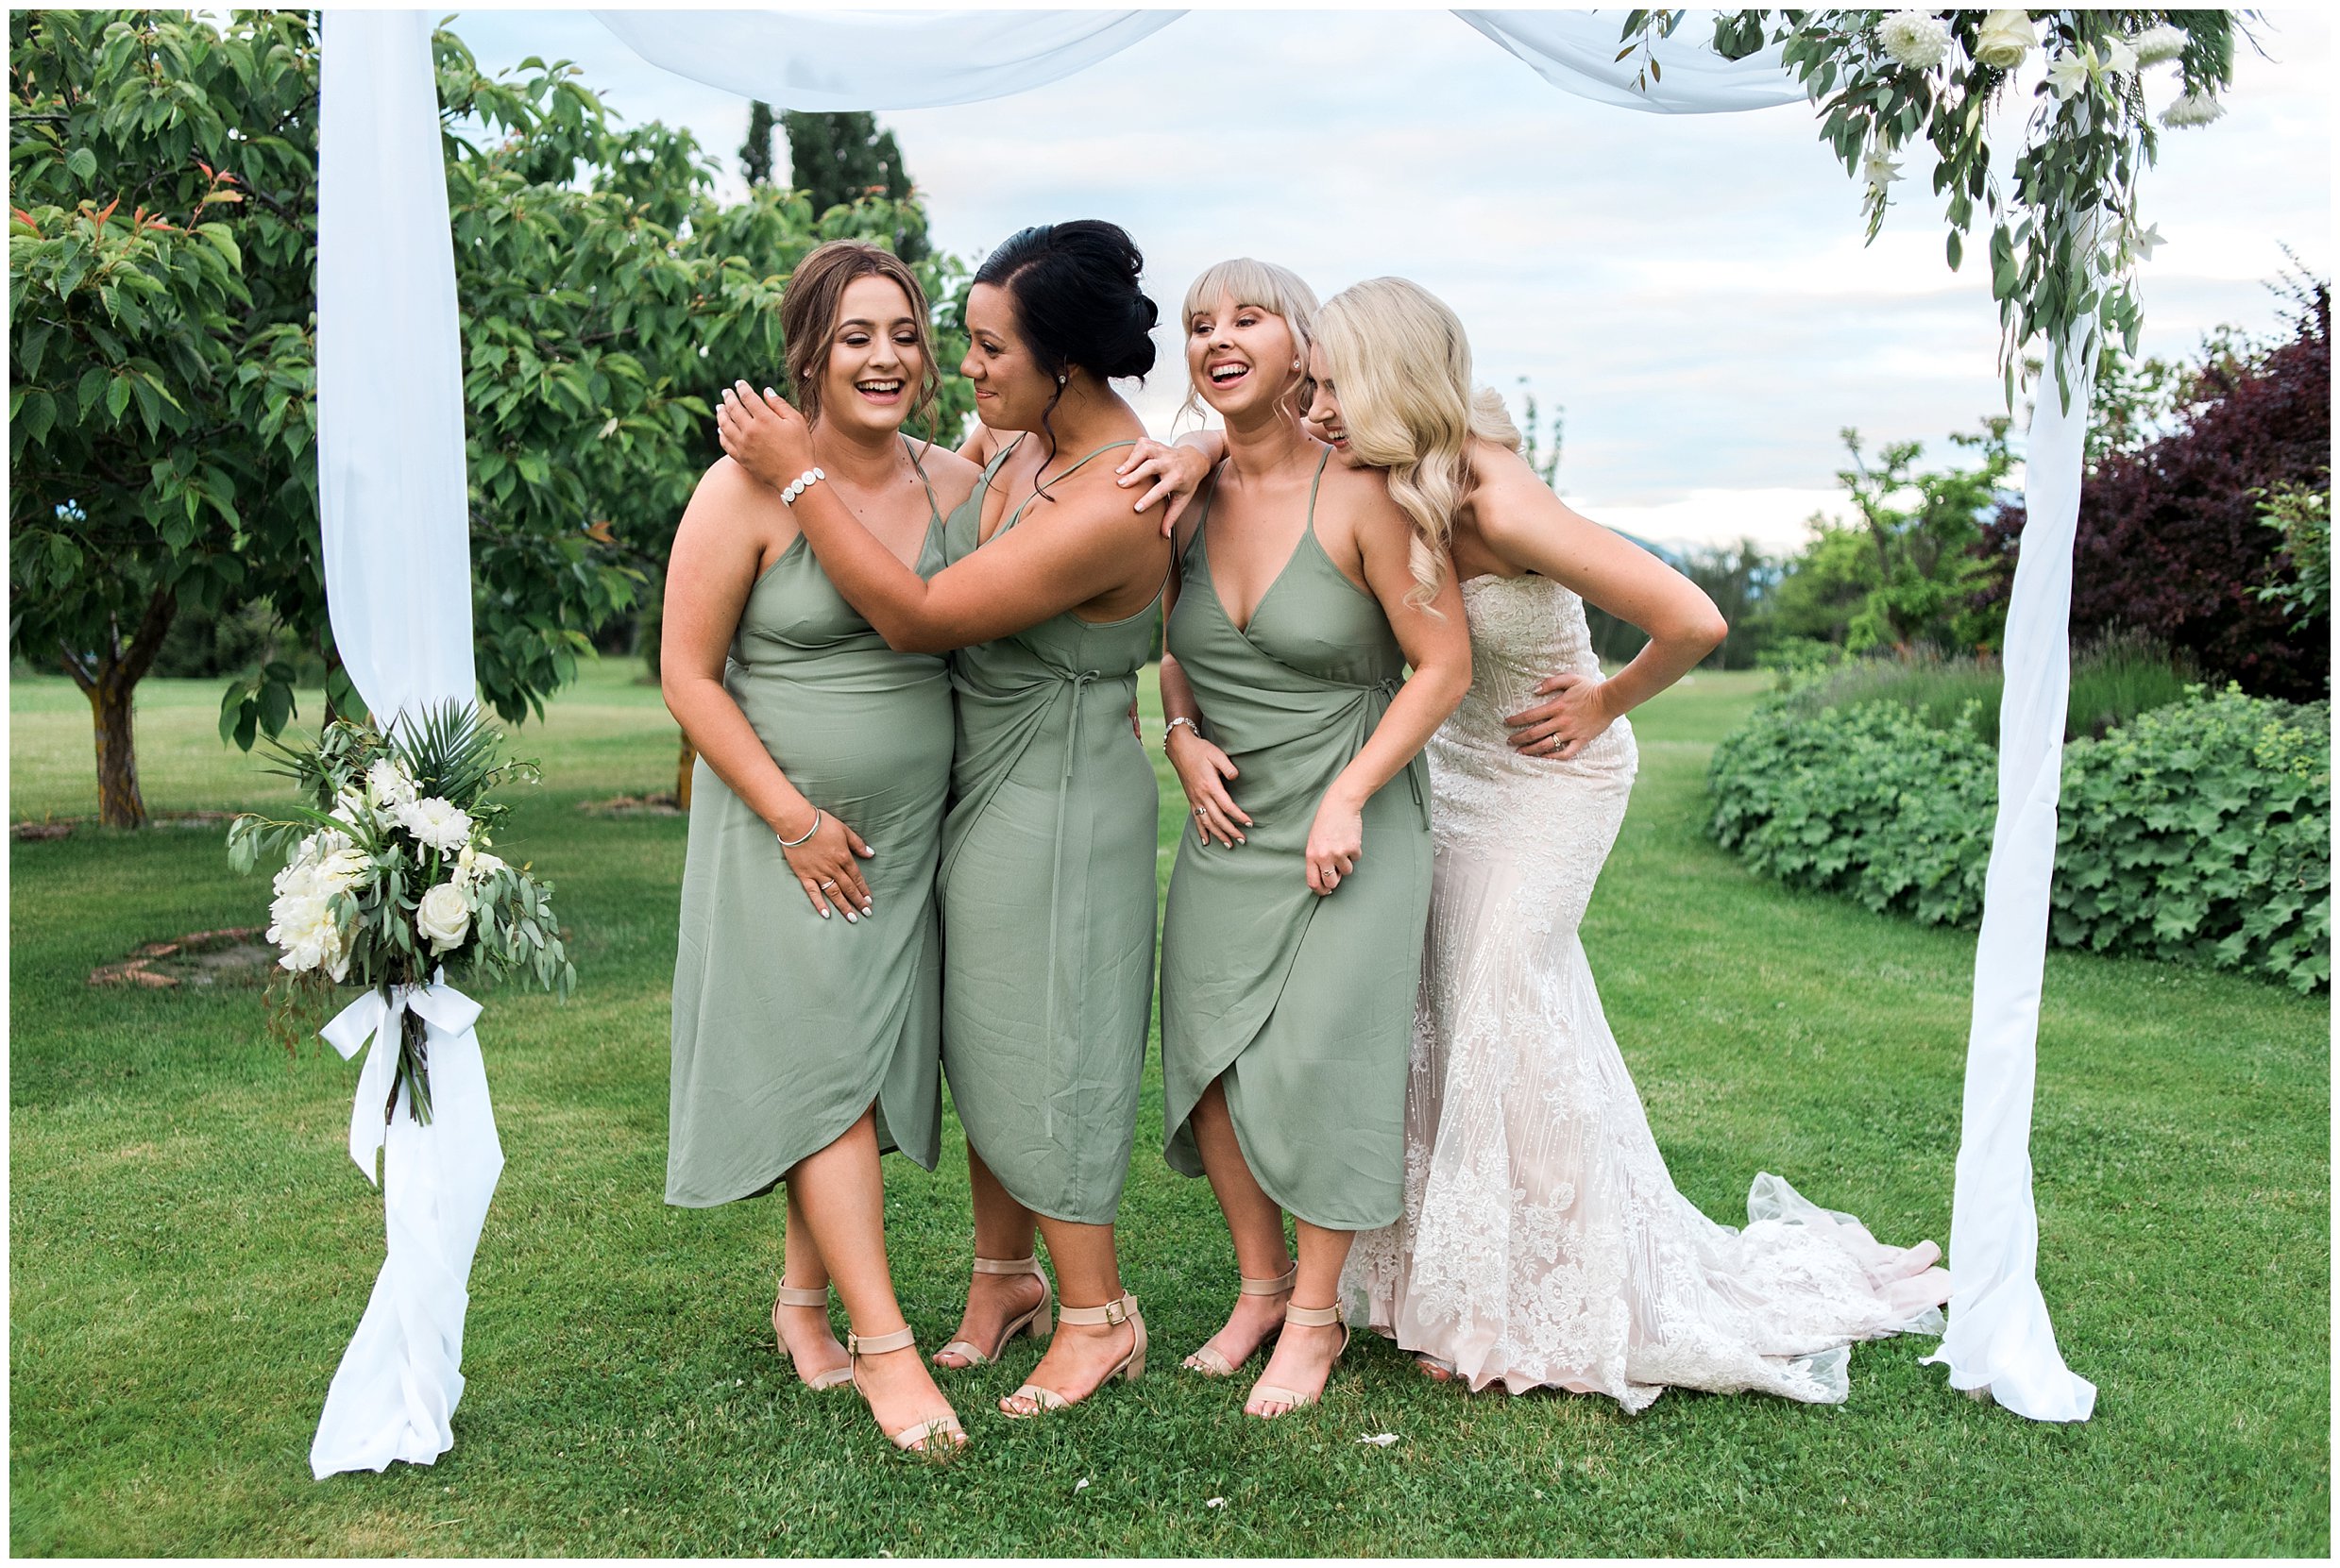 bridesmaids wanaka wedding sage green bride laughing candid sunset evening reception outside lawn lipsky sons